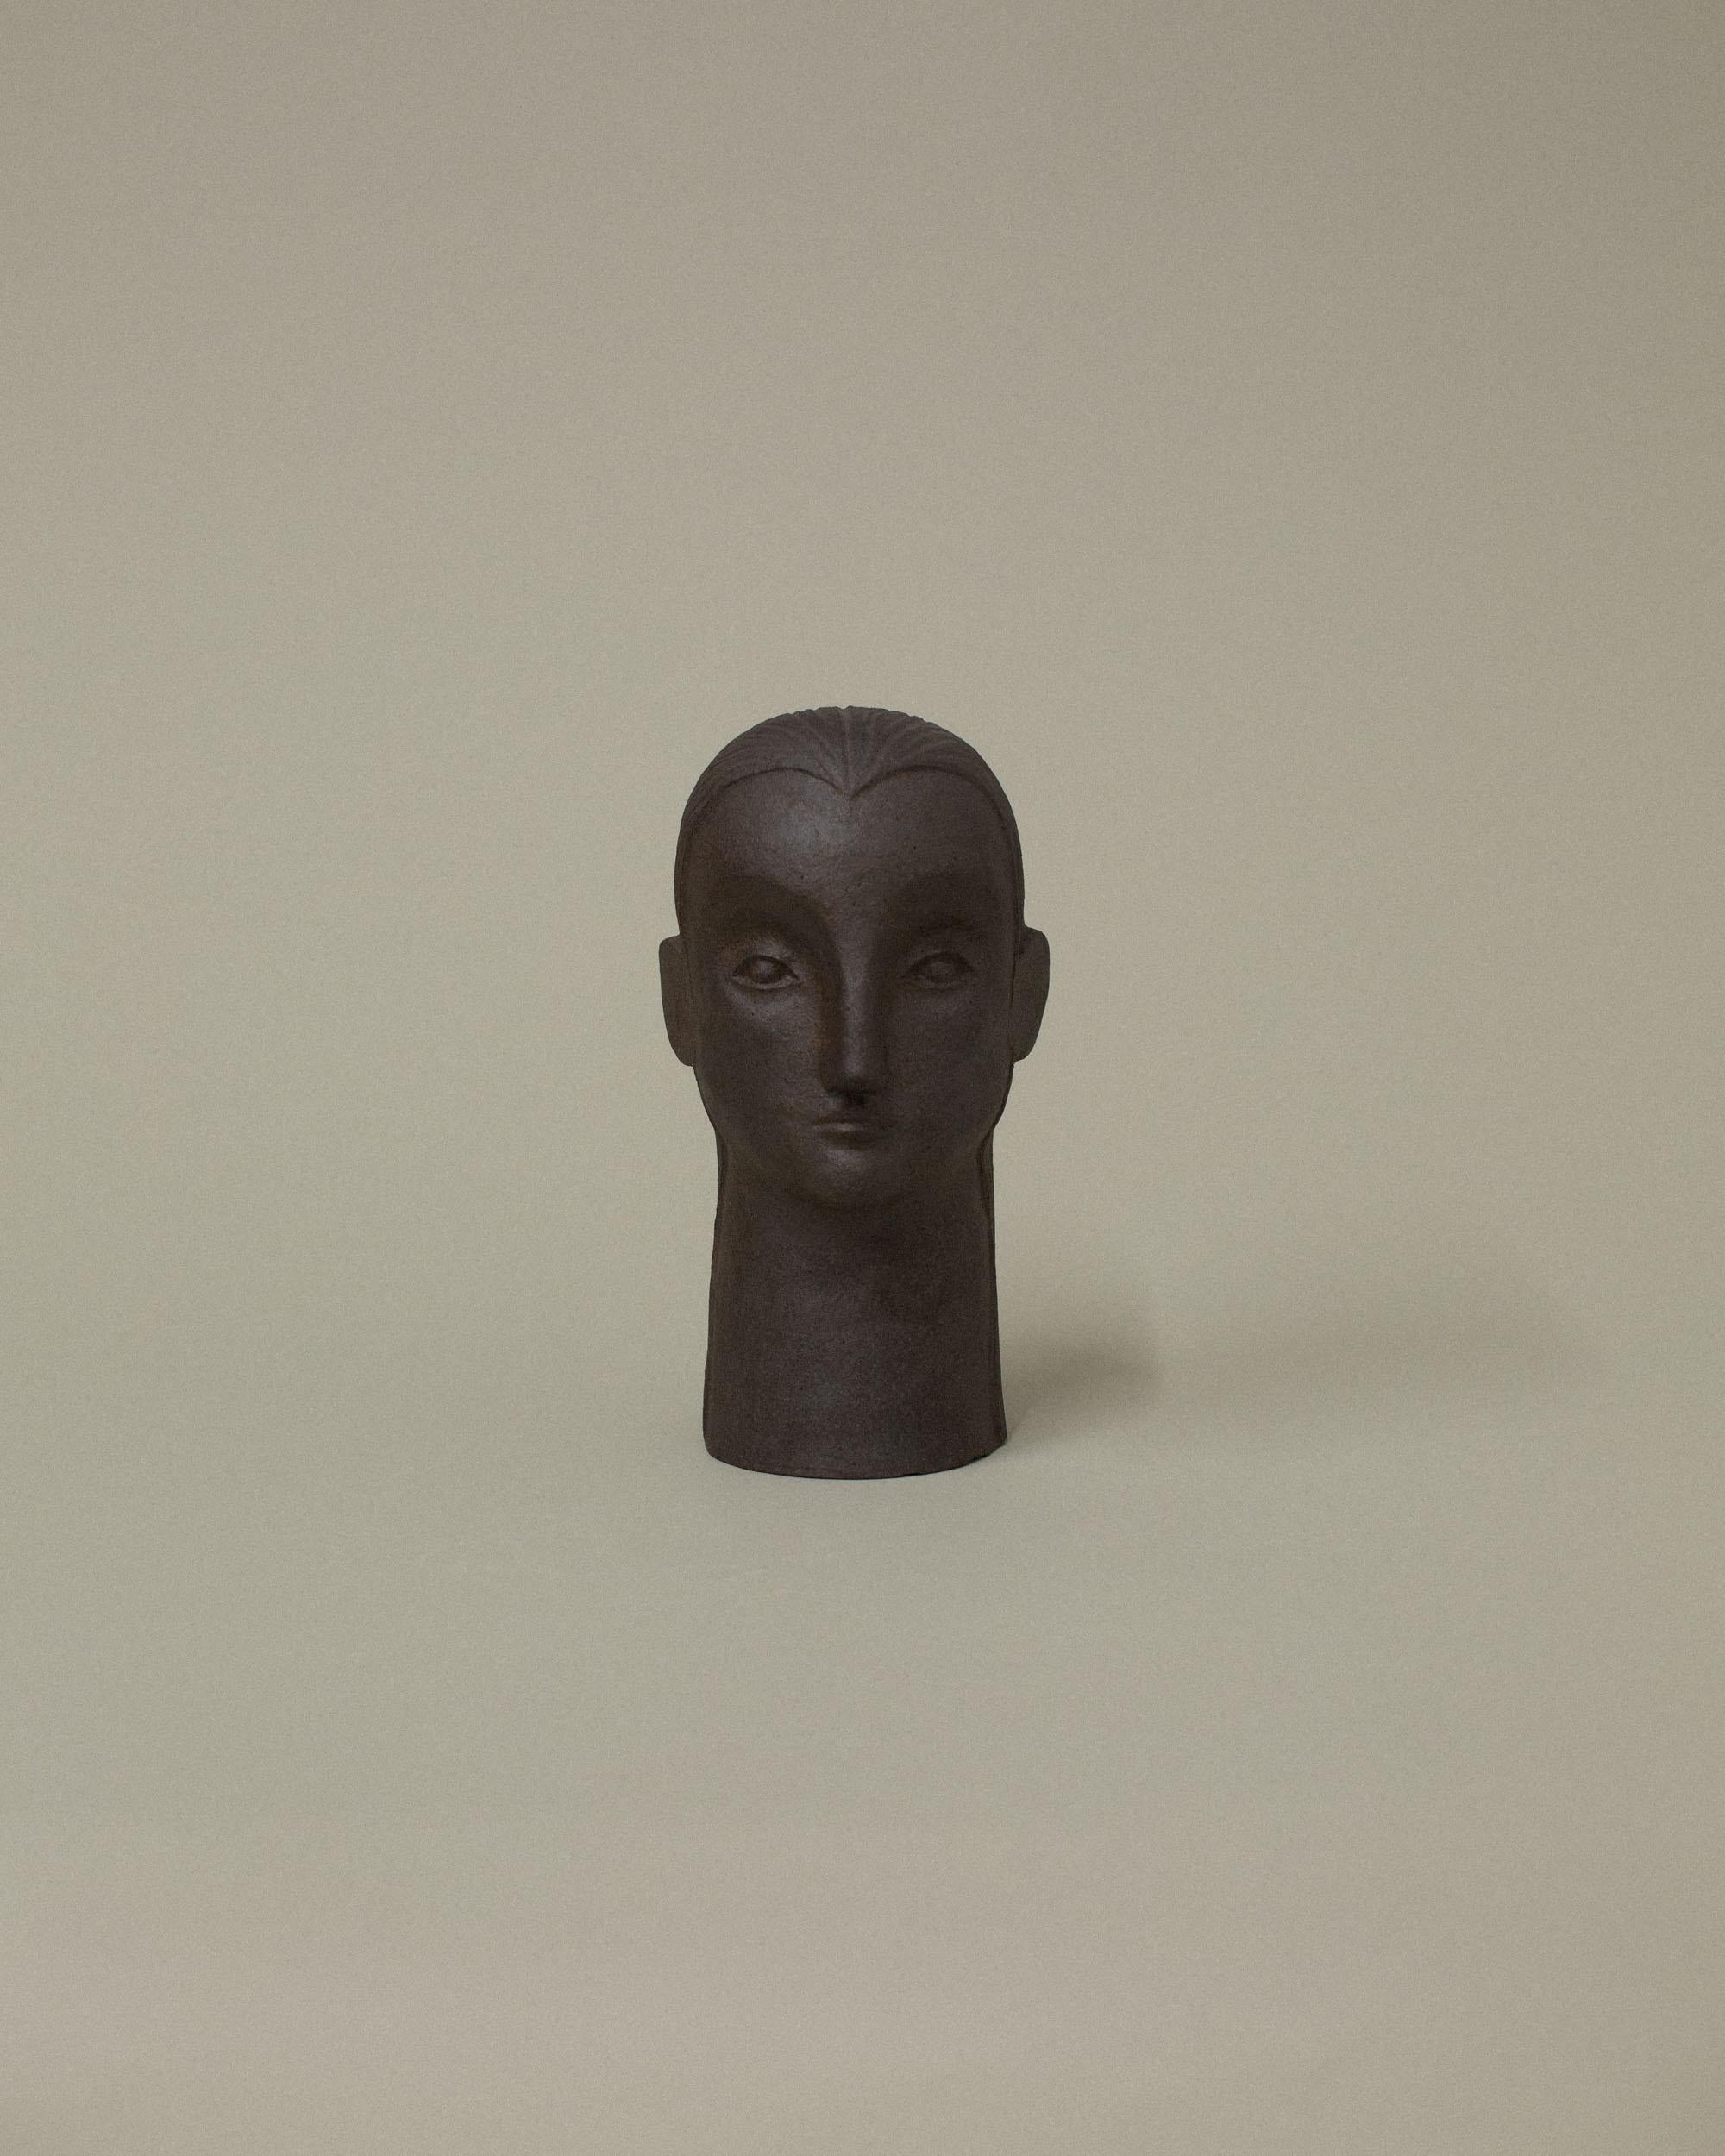 Dark Brown Poise Sculpture by Common Body
Dimensions: W 14 x D 13 x H 22 cm
Materials: Dark Brown Ceramic


Common body is a sculpture and interior object studio founded by nathaniel kyung smith, an artist whose passion lies in the intersection of